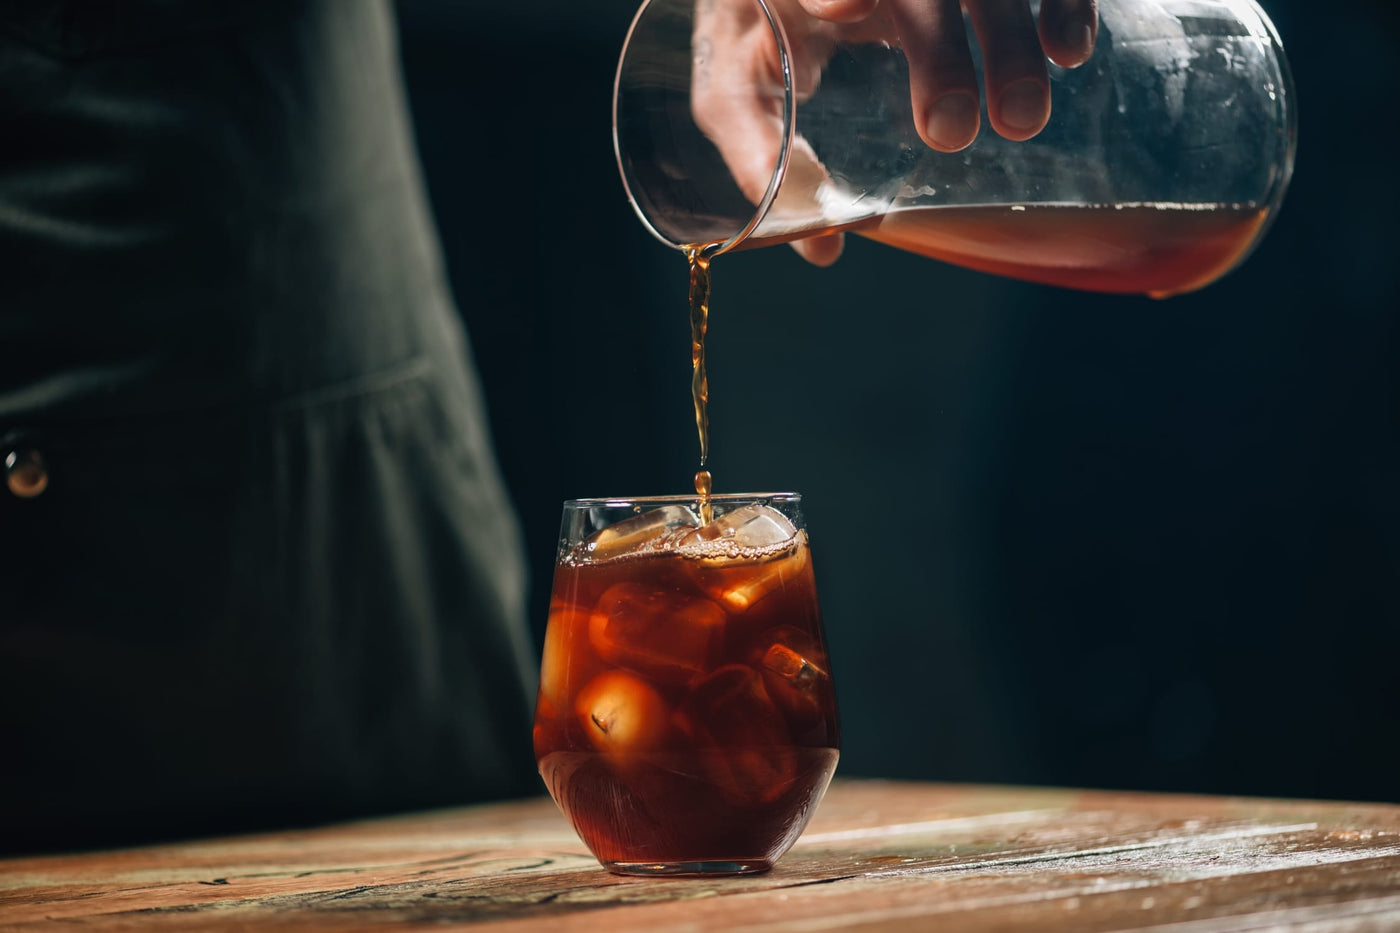 Learn how to brew iced coffee